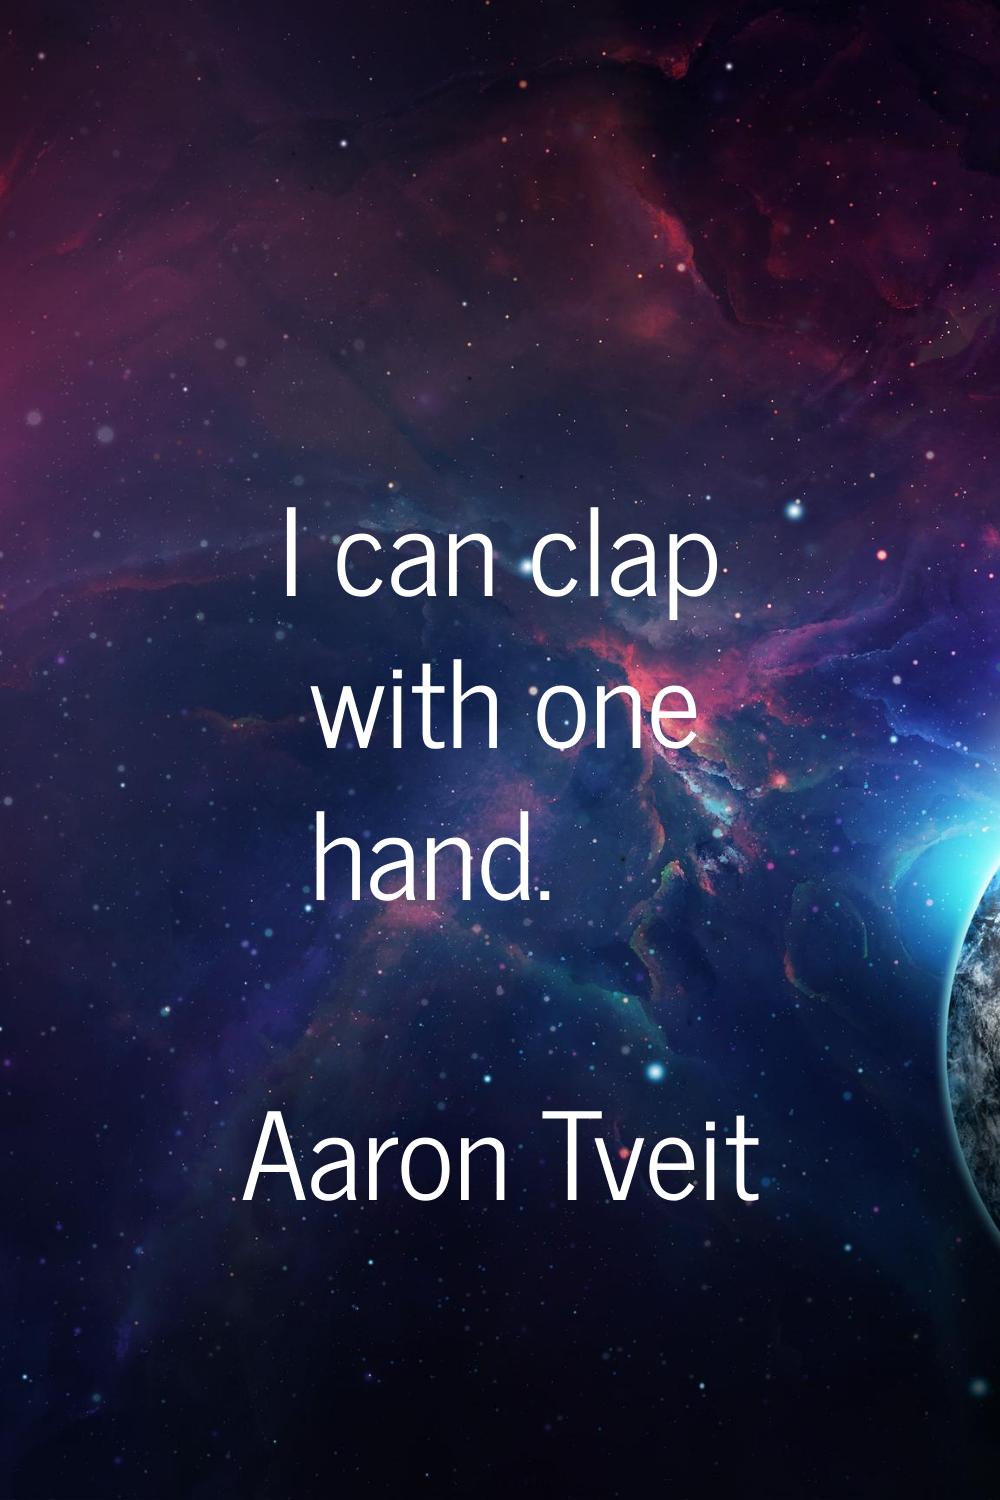 I can clap with one hand.